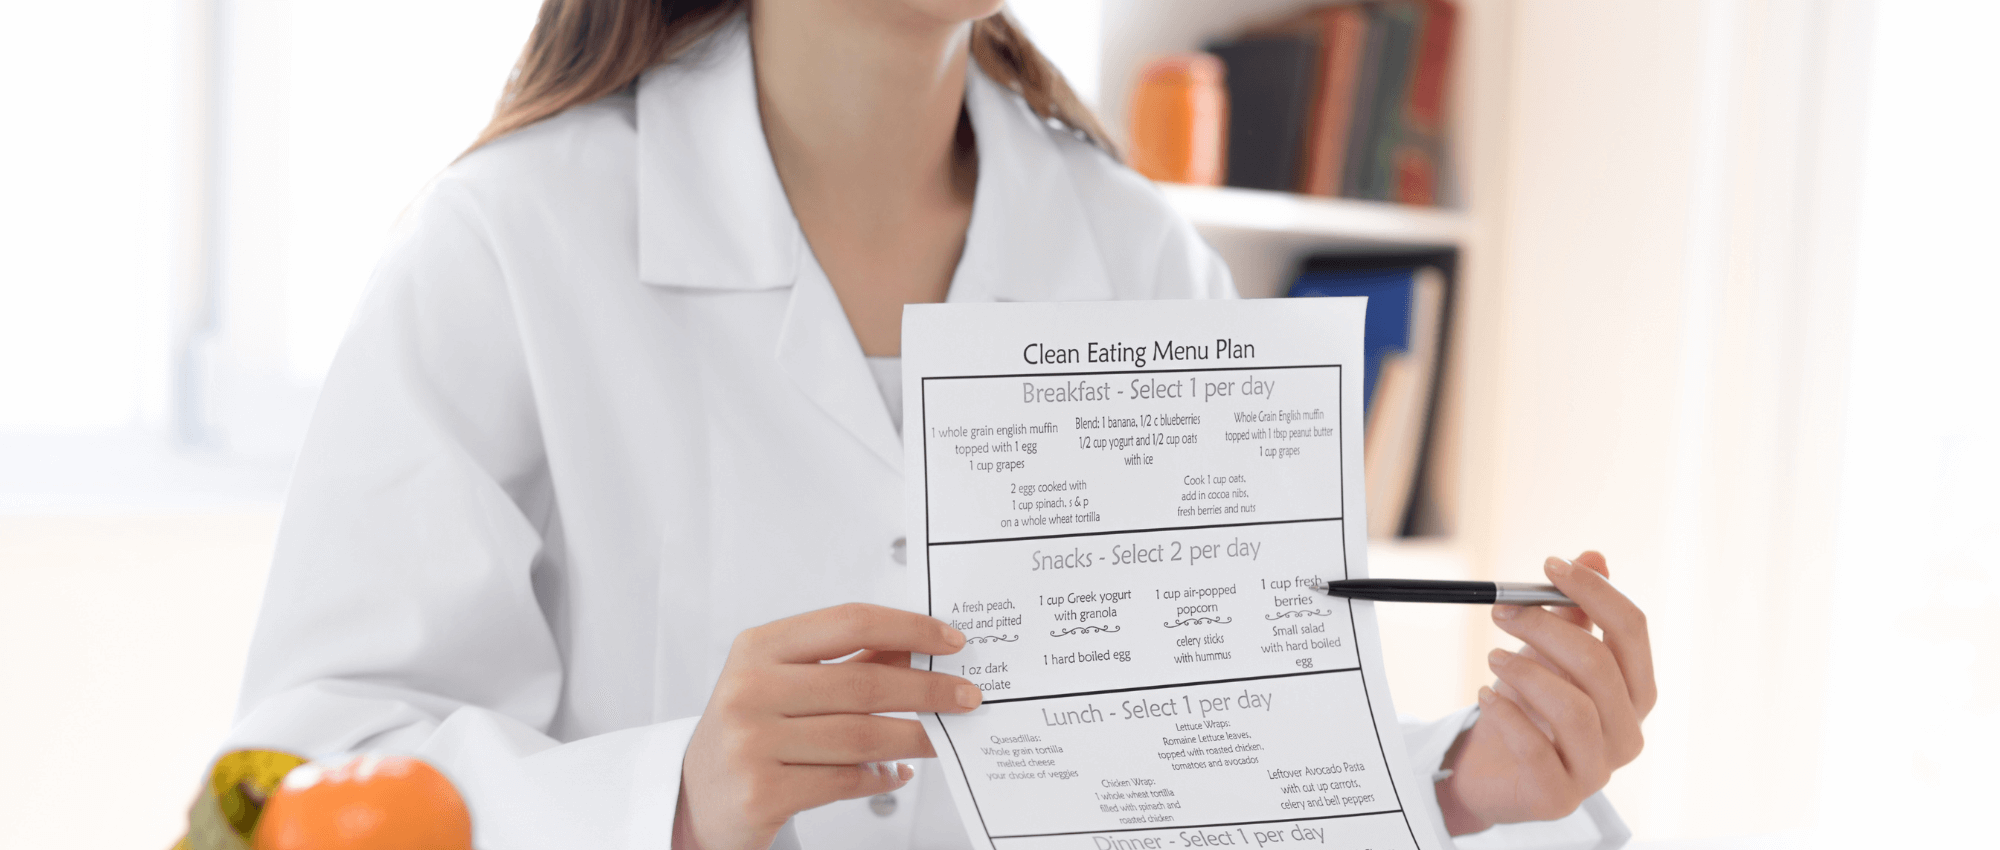 nutritionist holding up clean eating menu plan